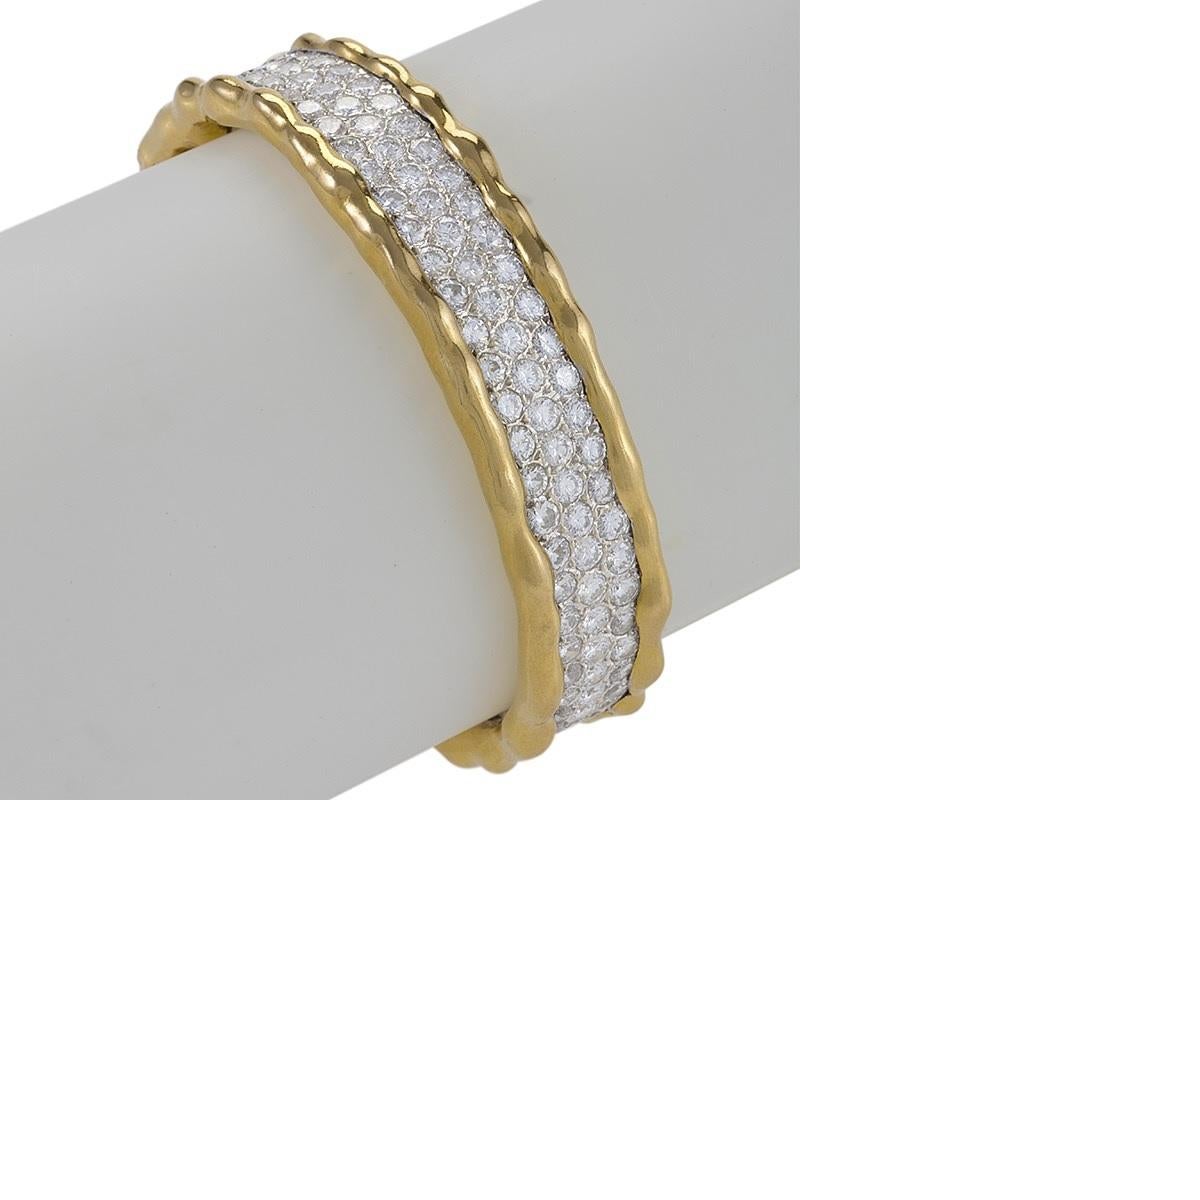 A French 18 karat gold bangle bracelet with diamonds by Van Cleef & Arpels. The Lascaux bangle bracelet has 141 round brilliant-cut diamonds with an approximate total weight of 13.0 carats. The have a G/H color and VS clarity grade.
 Circa